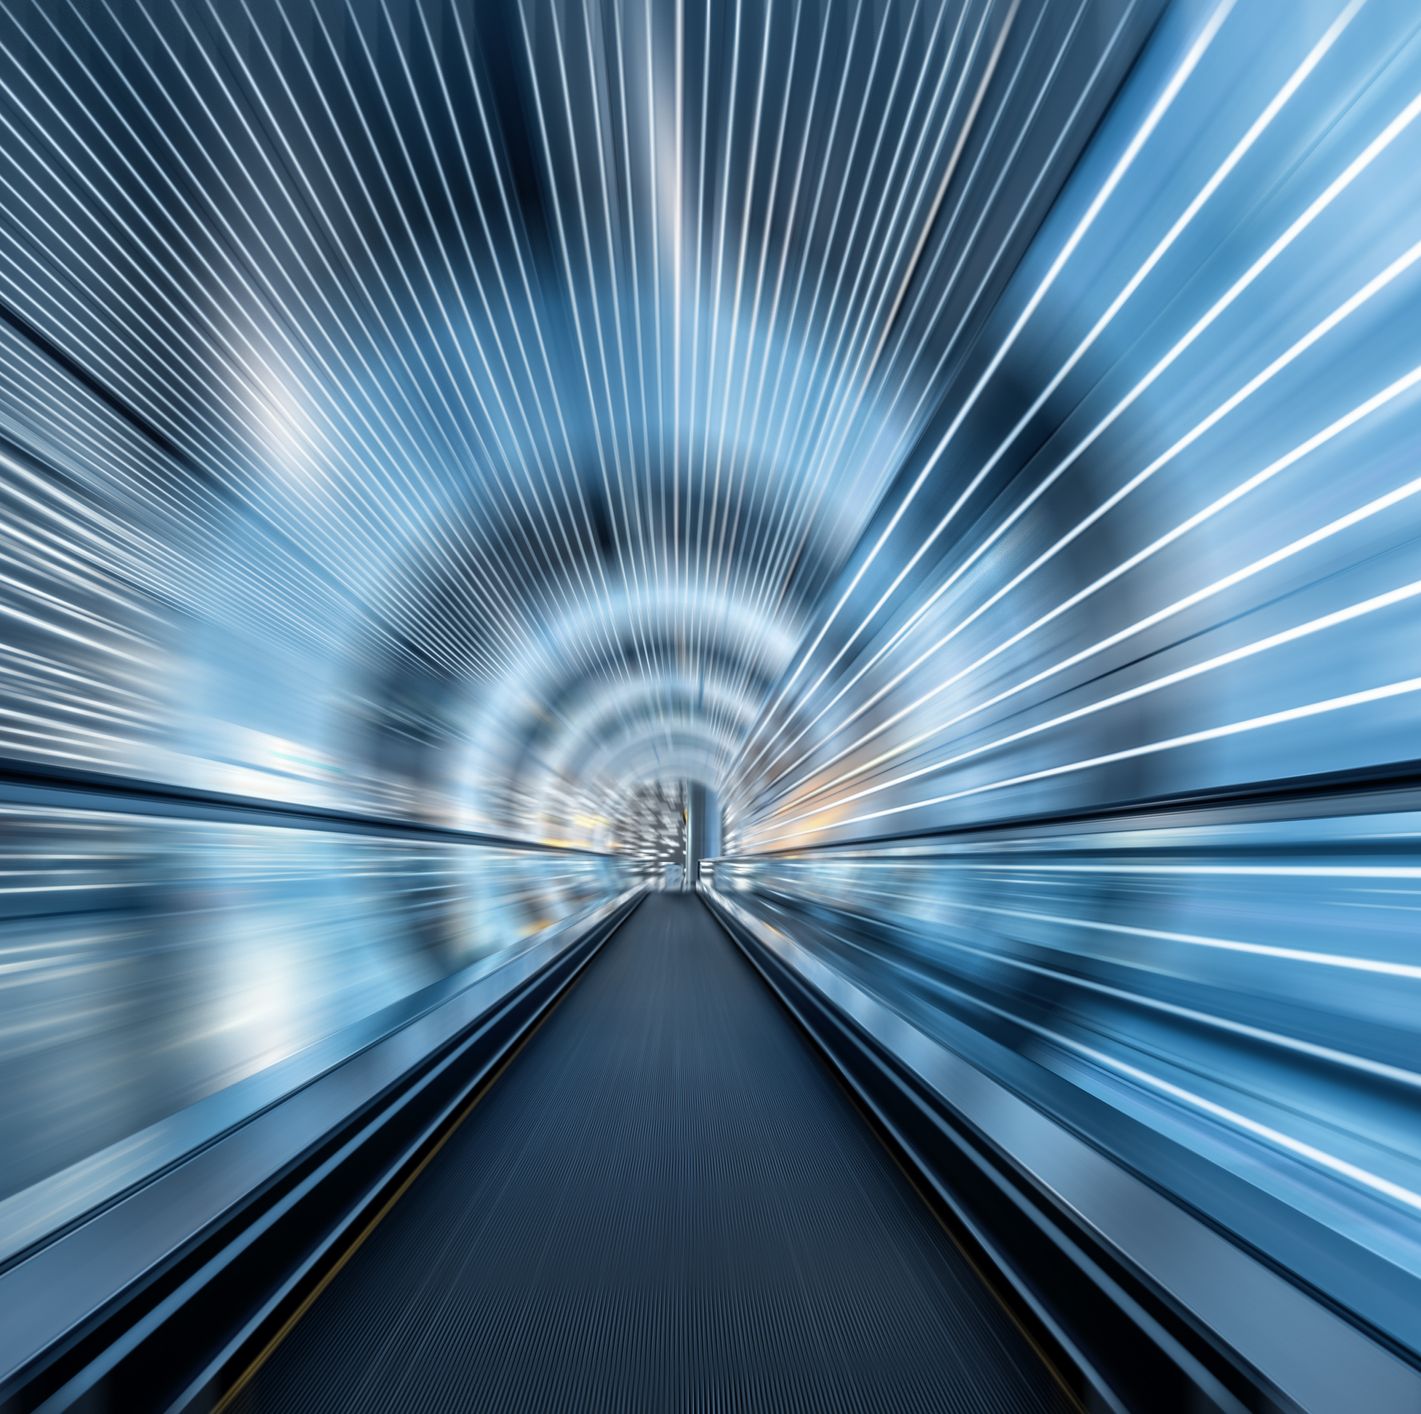 Physicists Are Pretty Damn Sure We Can Travel Faster Than the Speed of Light, Research Shows